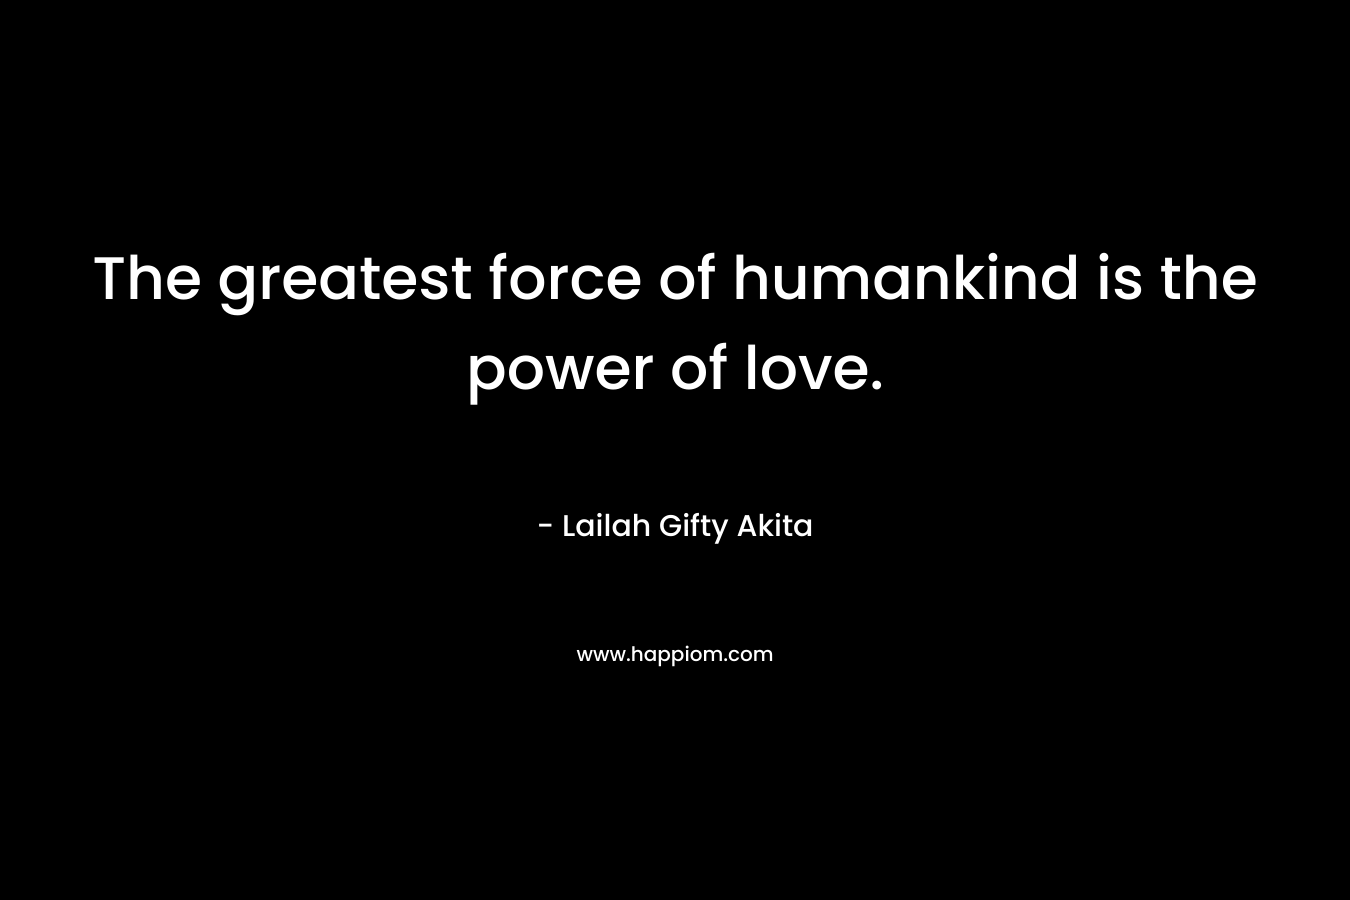 The greatest force of humankind is the power of love.